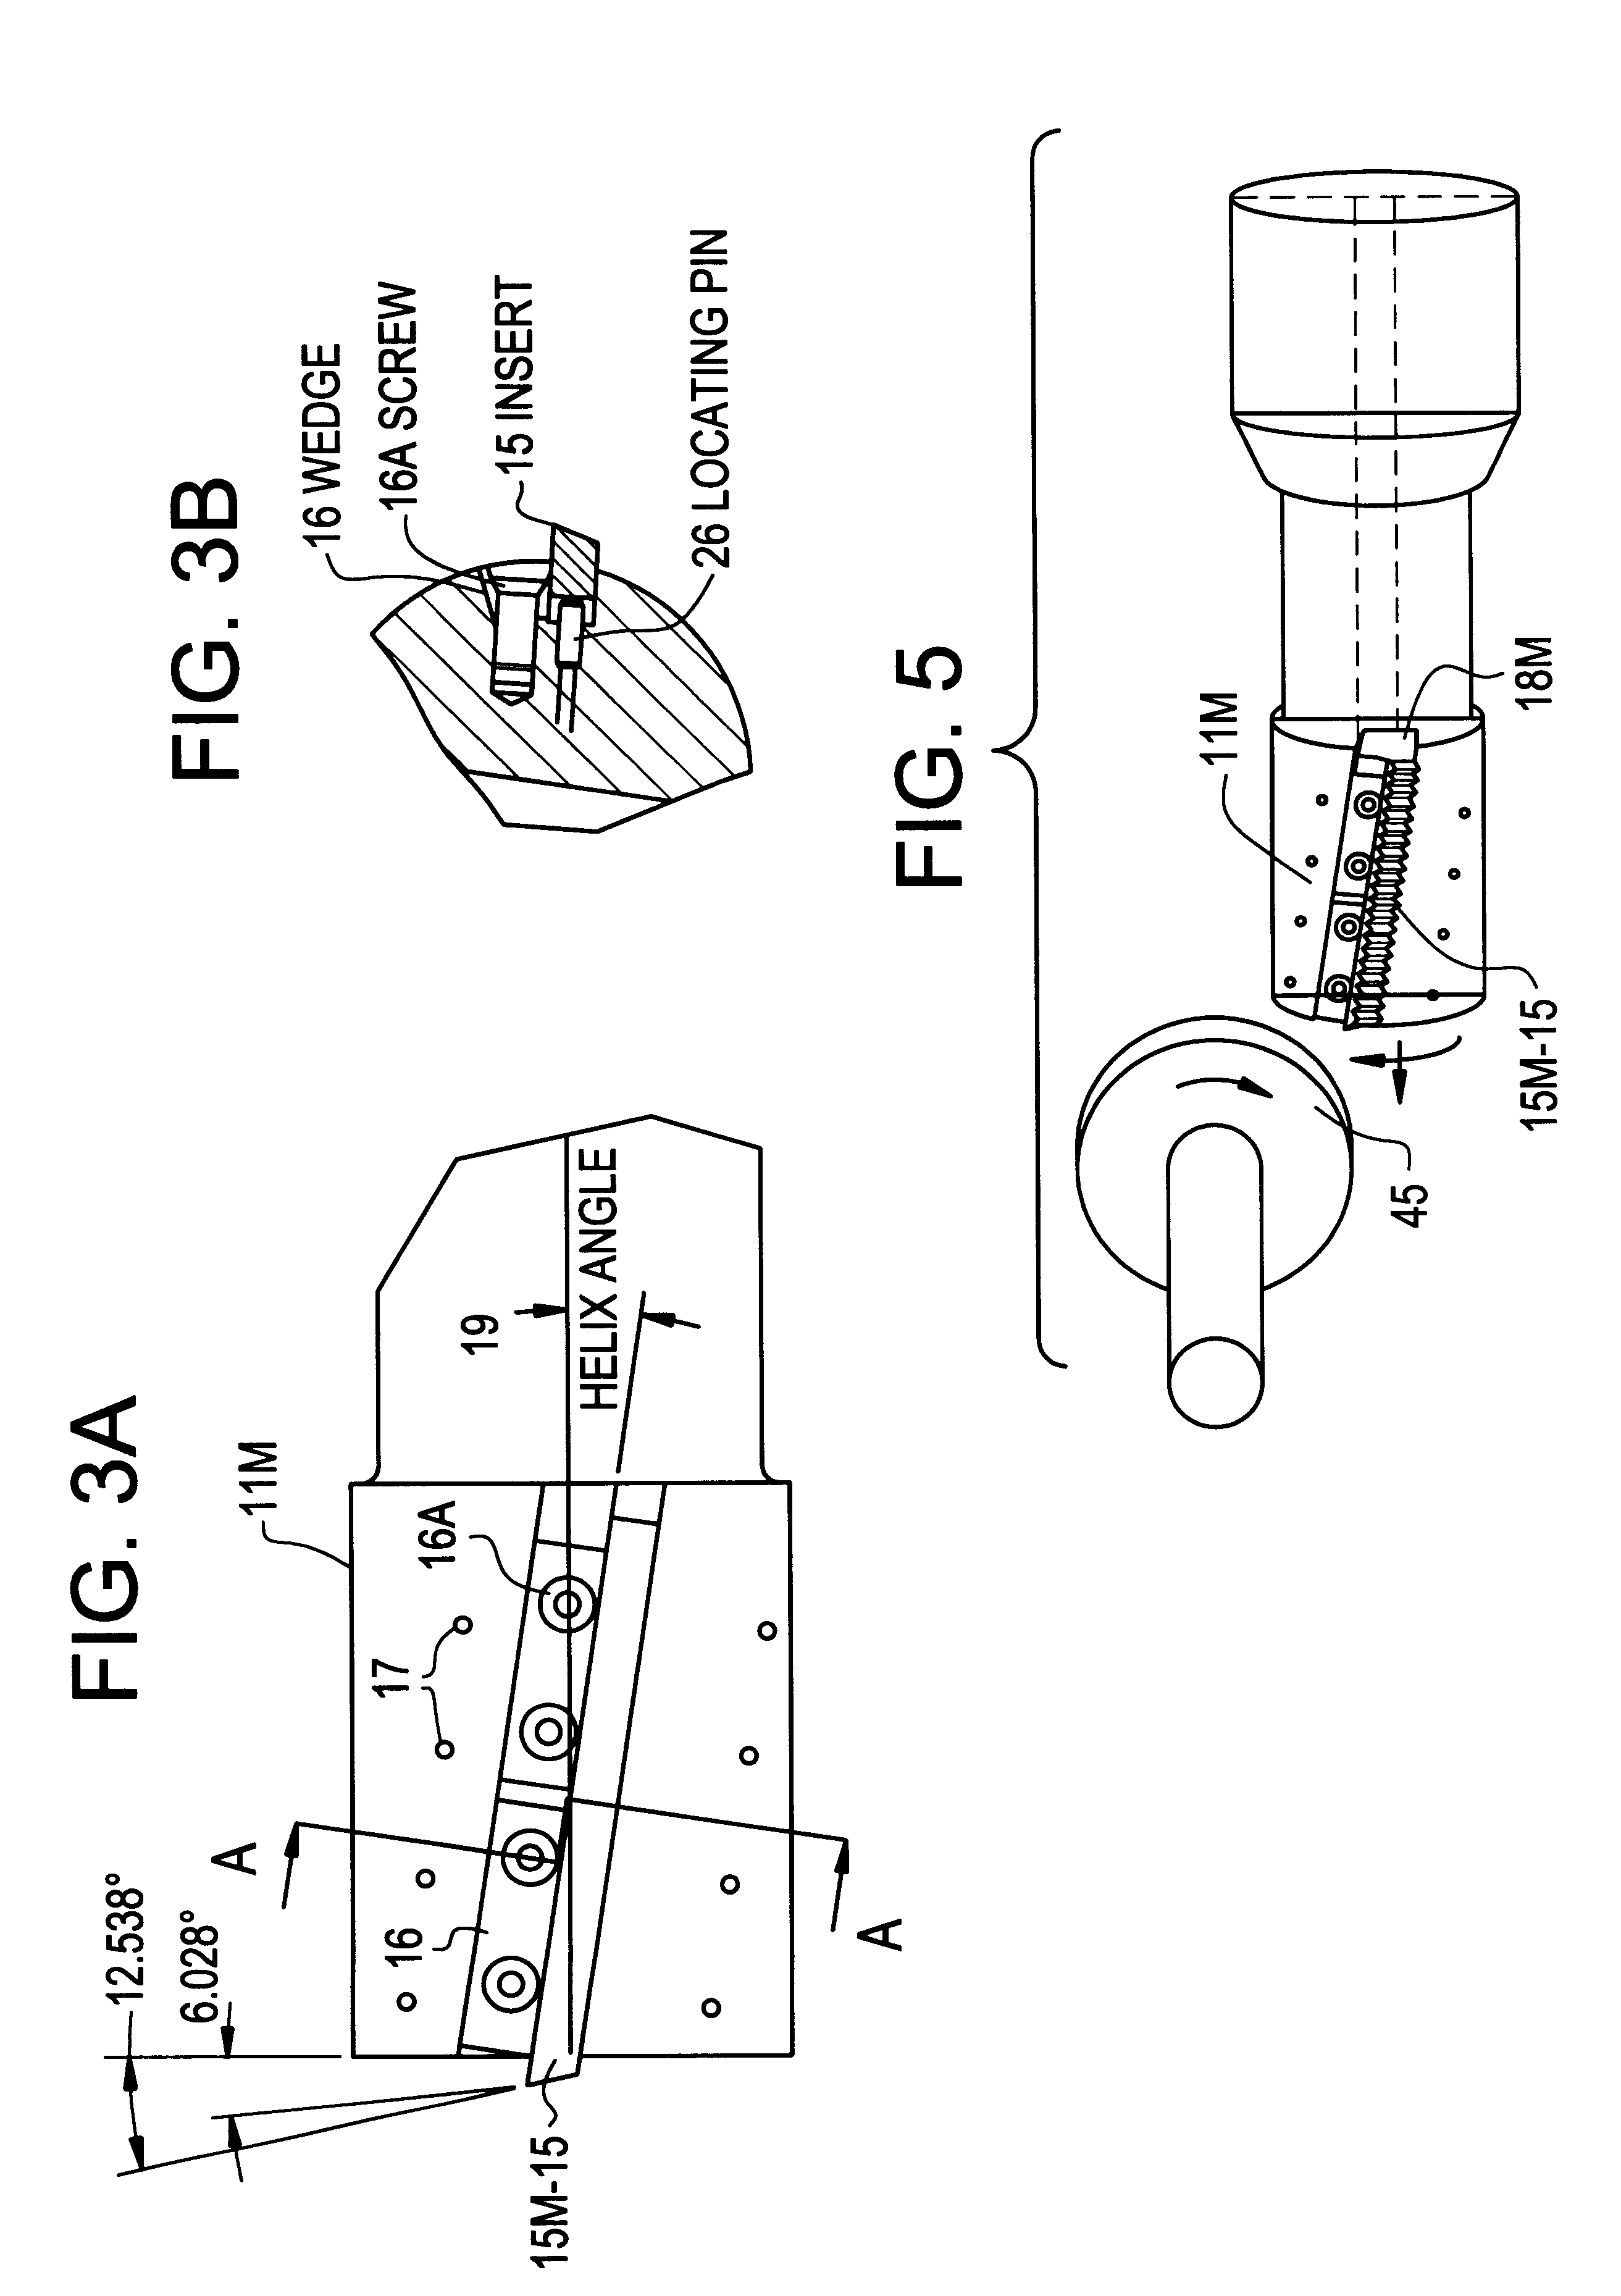 Tool with straight inserts for providing helical cutting action